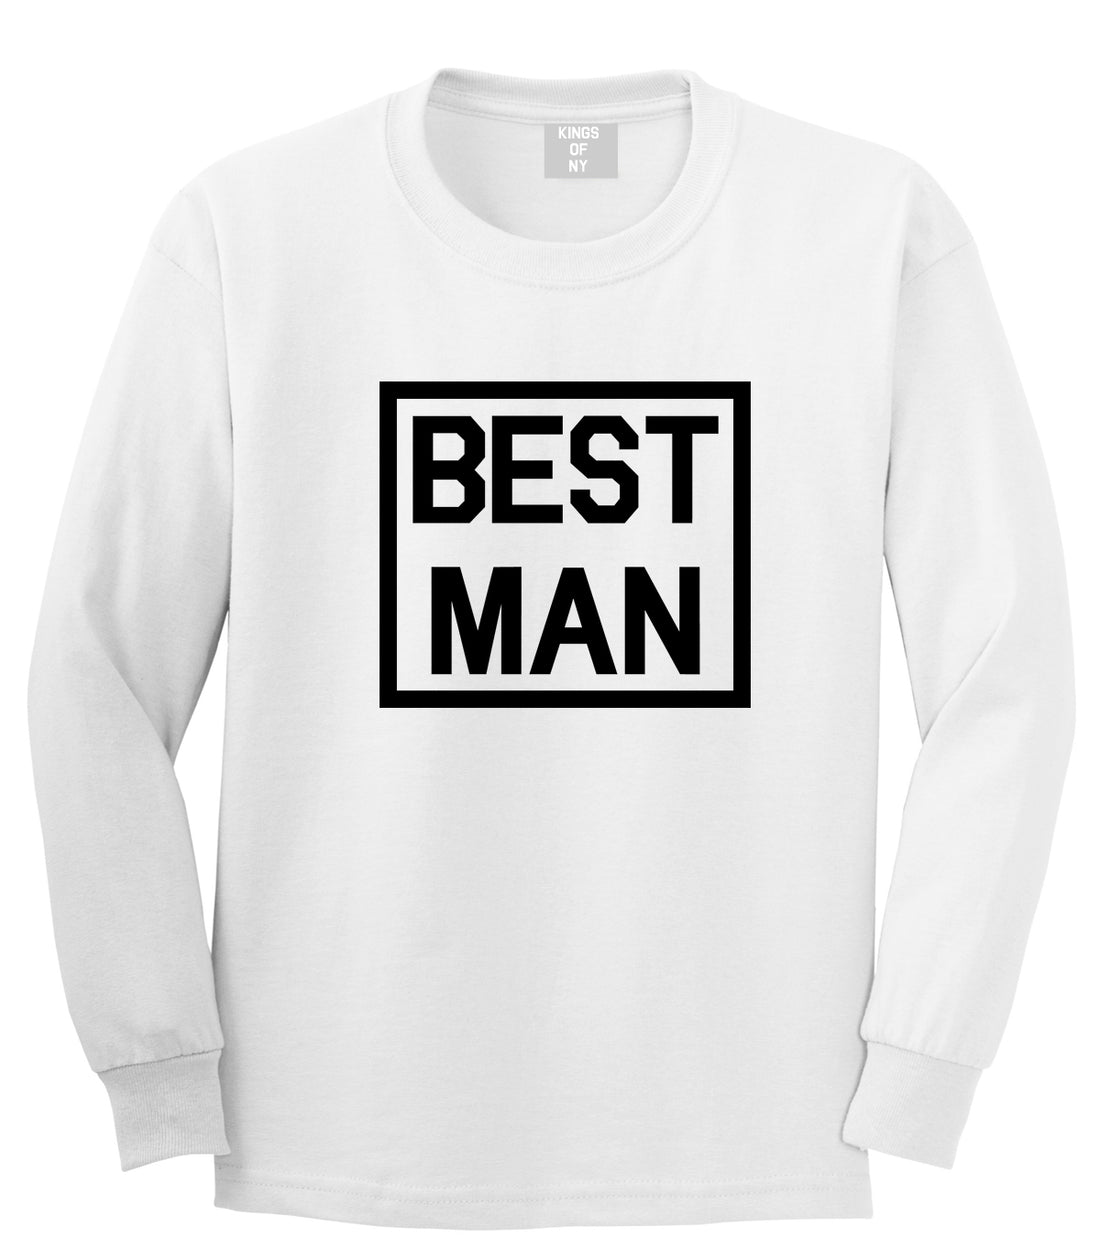 Best Man Bachelor Party White Long Sleeve T-Shirt by Kings Of NY